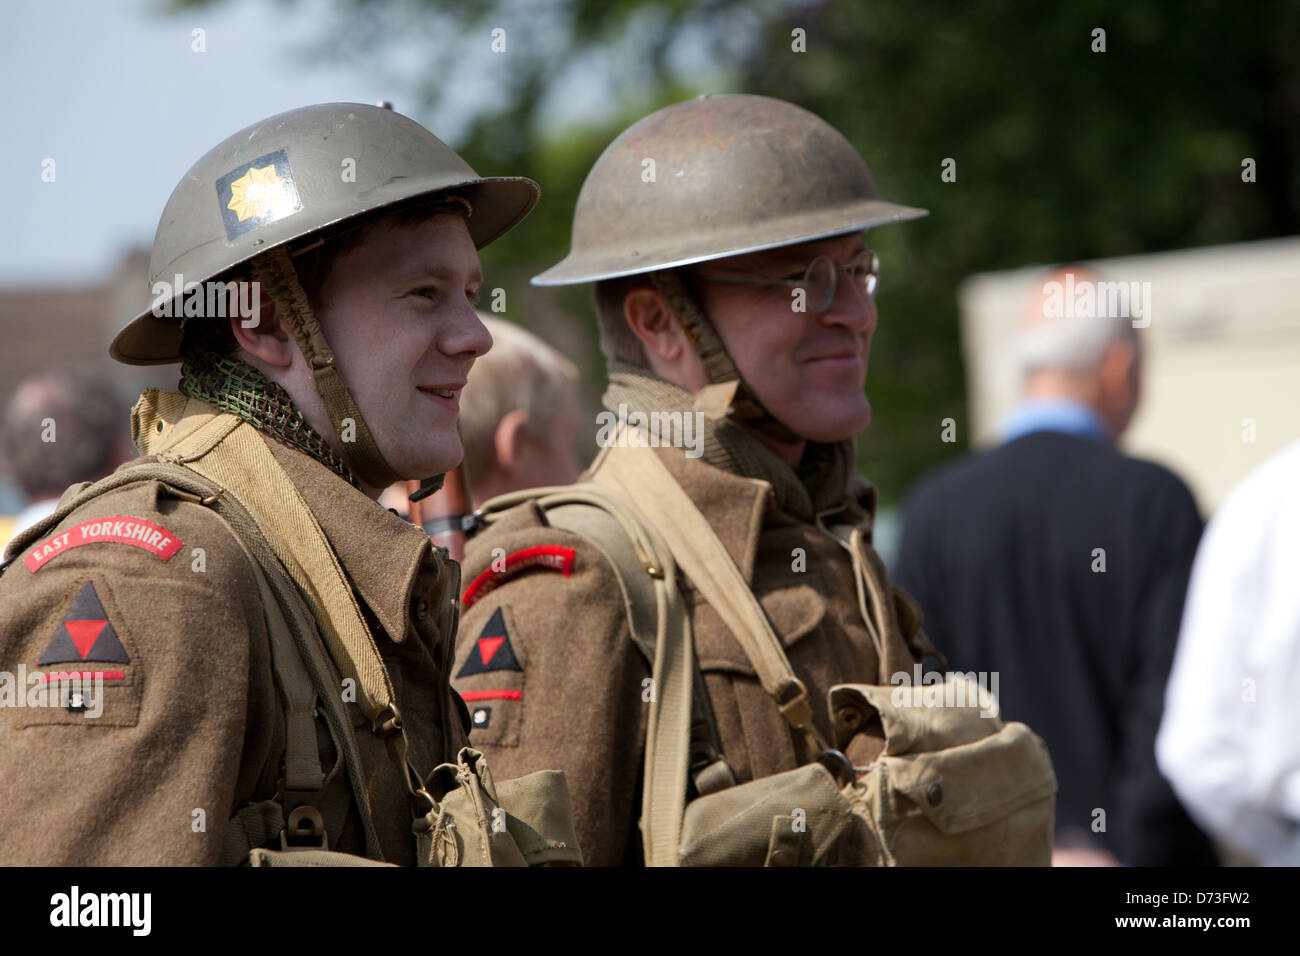 Enthusiasts in period costume at 1940's military reenactment at ...